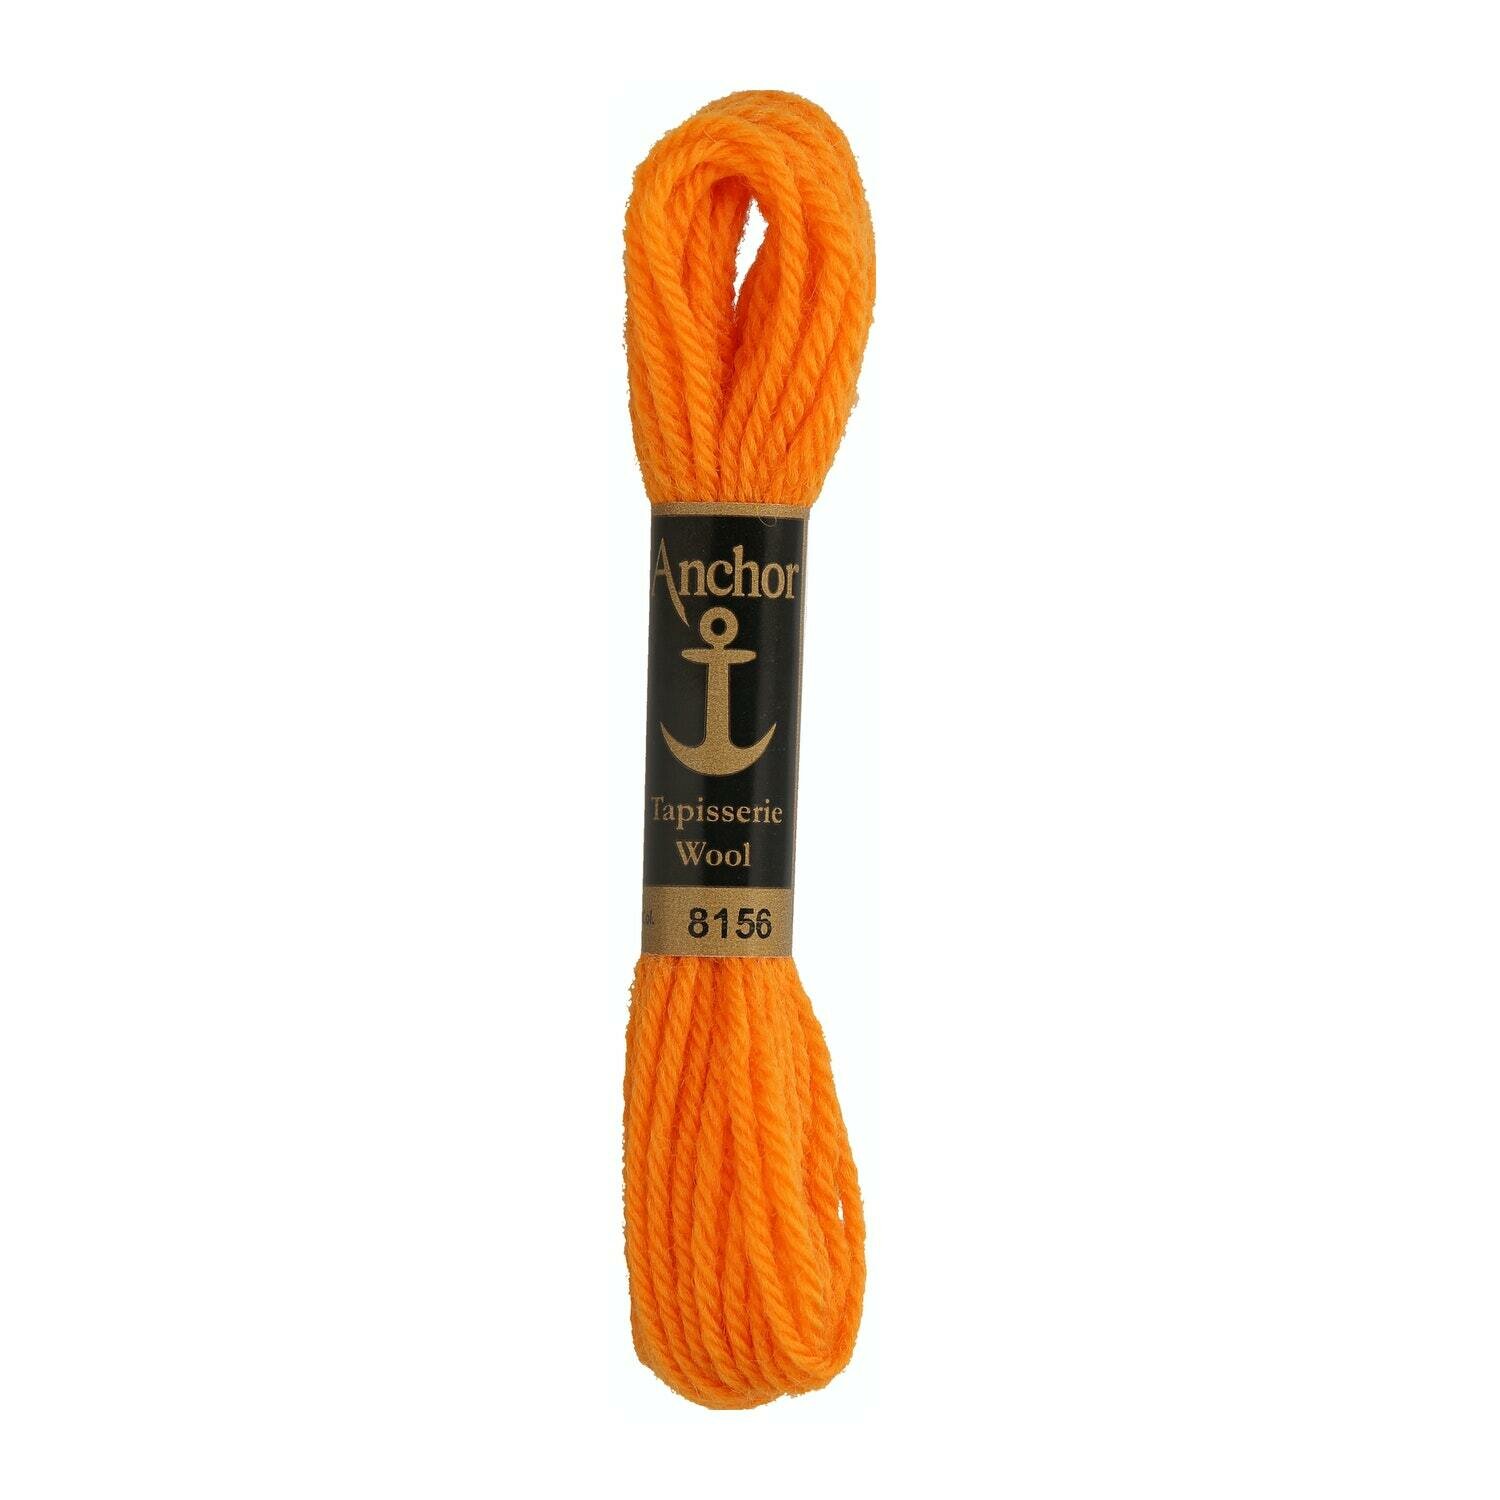 Anchor Tapisserie Wool # 08156